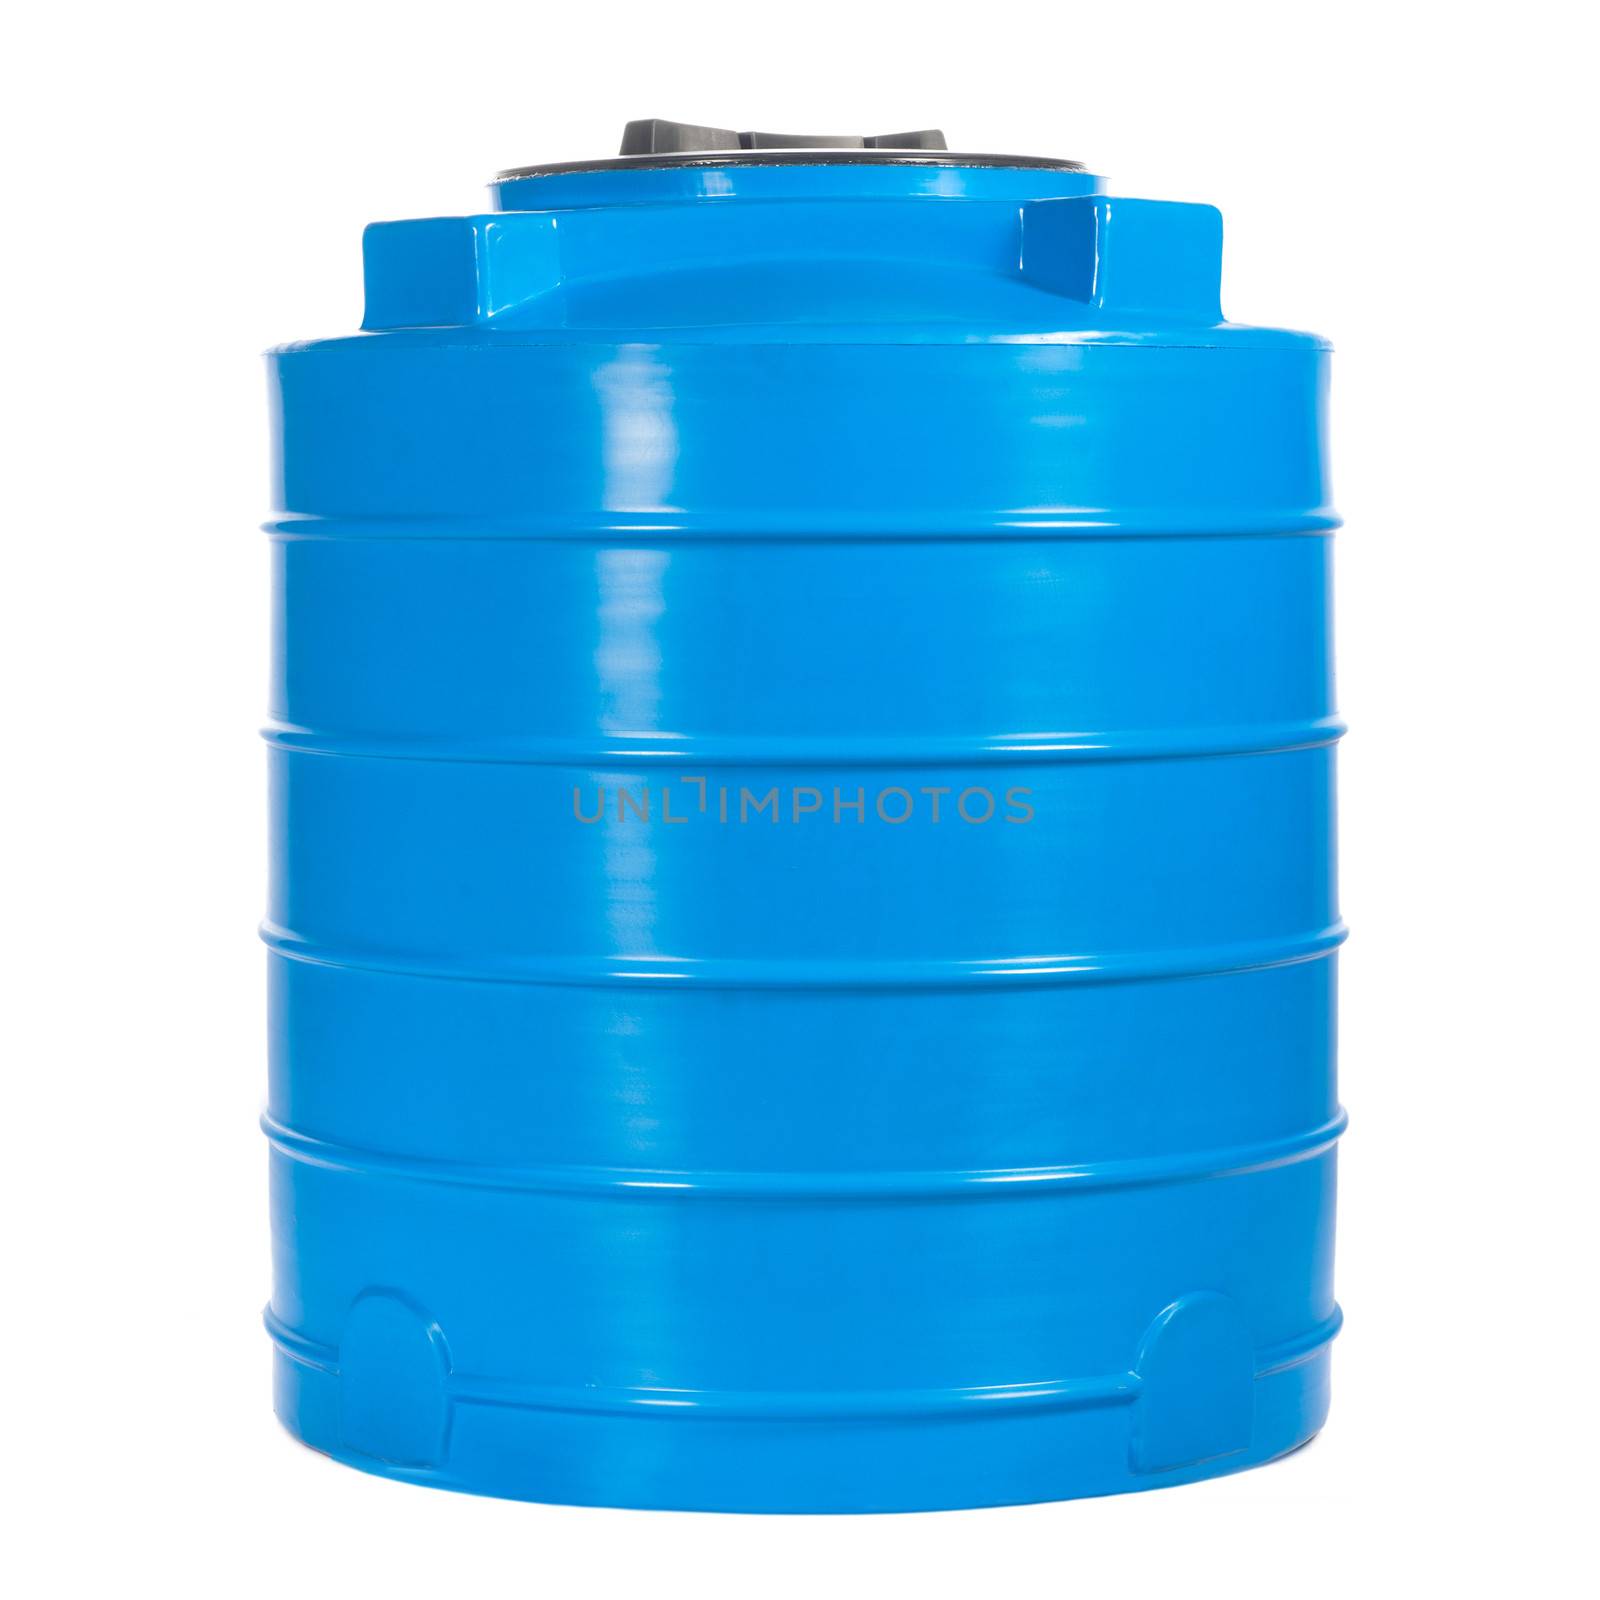 Big polyethylene container of 400 litres. Used for accumulation, storage and transportation of not only technical or drinking water, but also a variety of dry and liquid food products, as well as oils and chemicals.